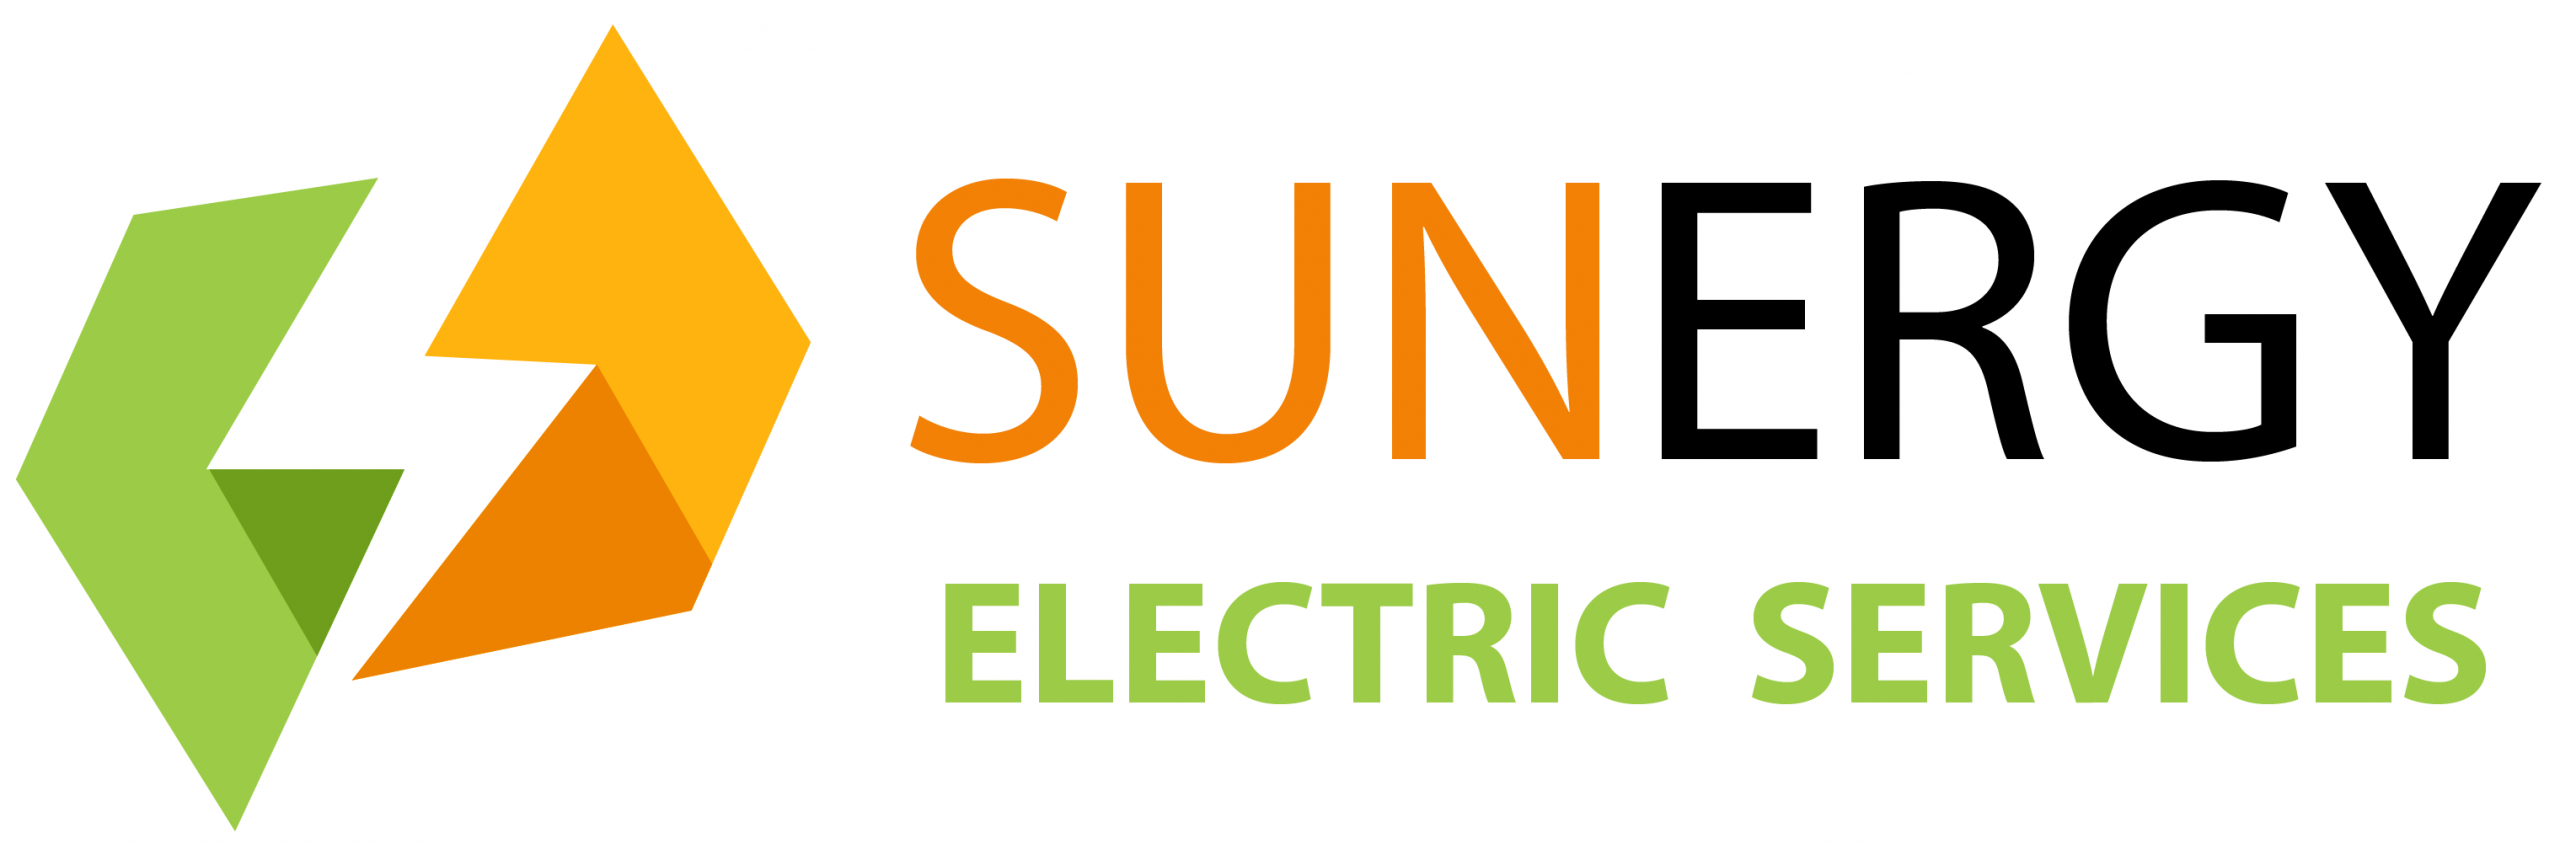 Sunergy Electric Services Logo